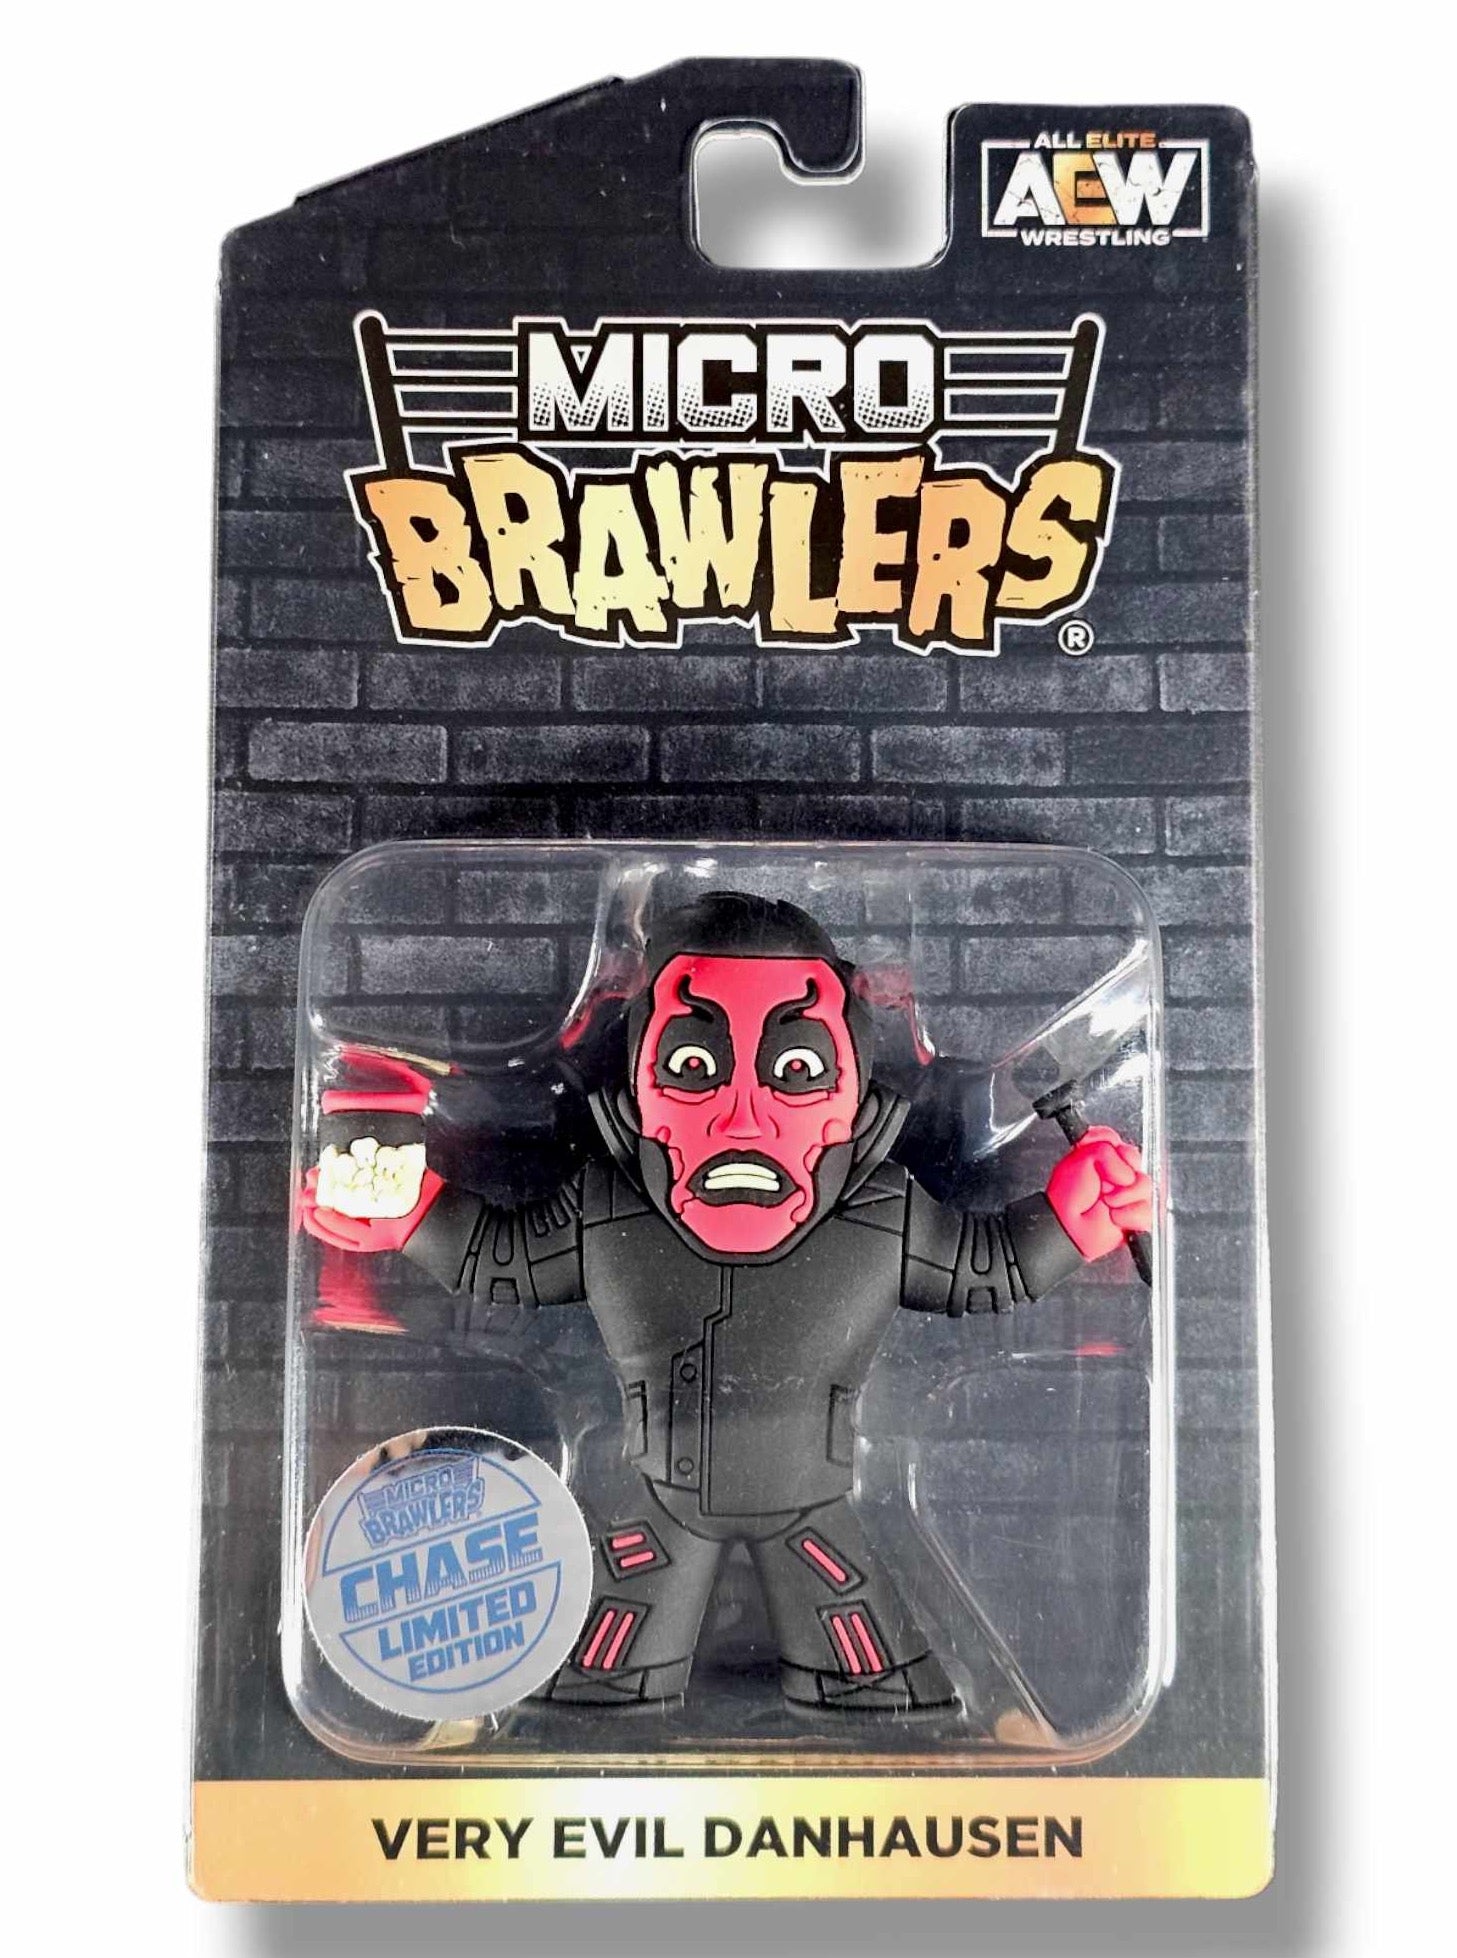 2023 AEW Pro Wrestling Tees Micro Brawlers Limited Edition